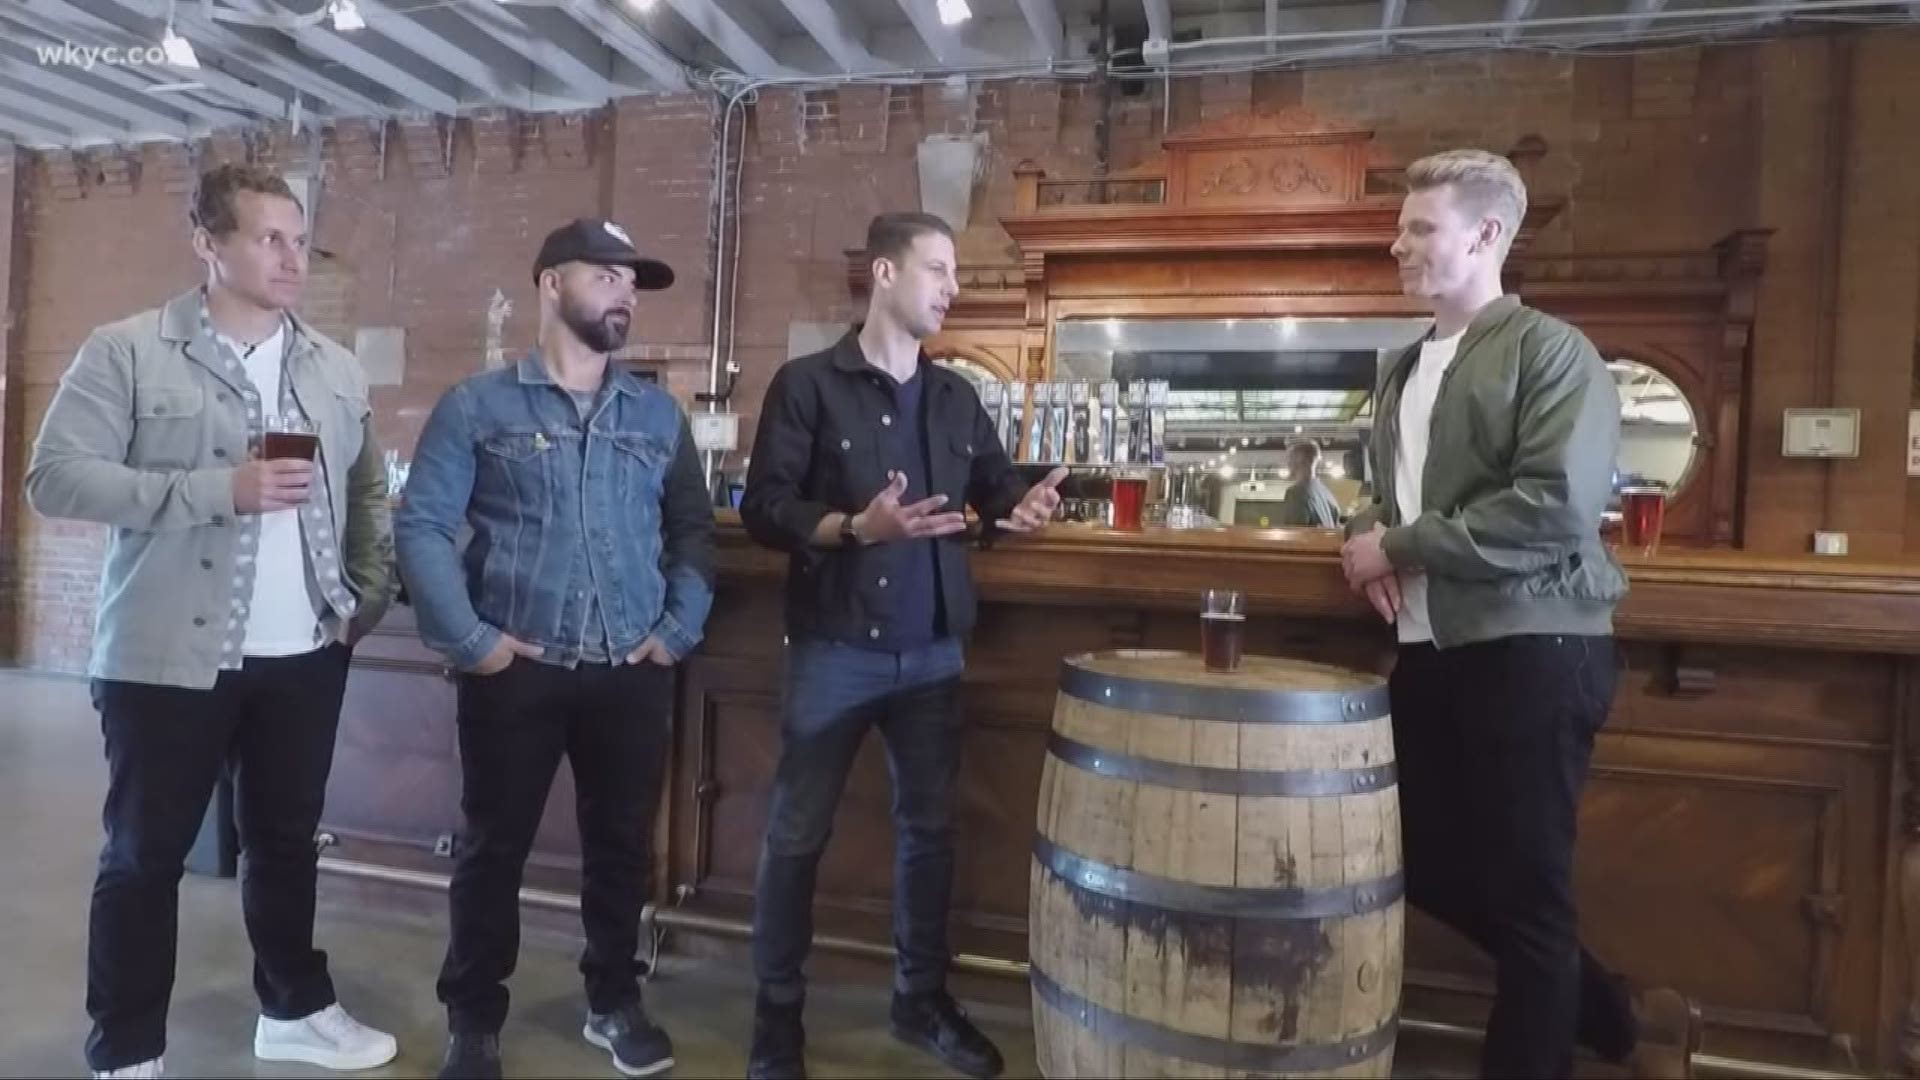 Austin Love spent some time with Ohio-based band O.A.R. to learn about their new partnership with Cleveland's Great Lakes Brewing Co.